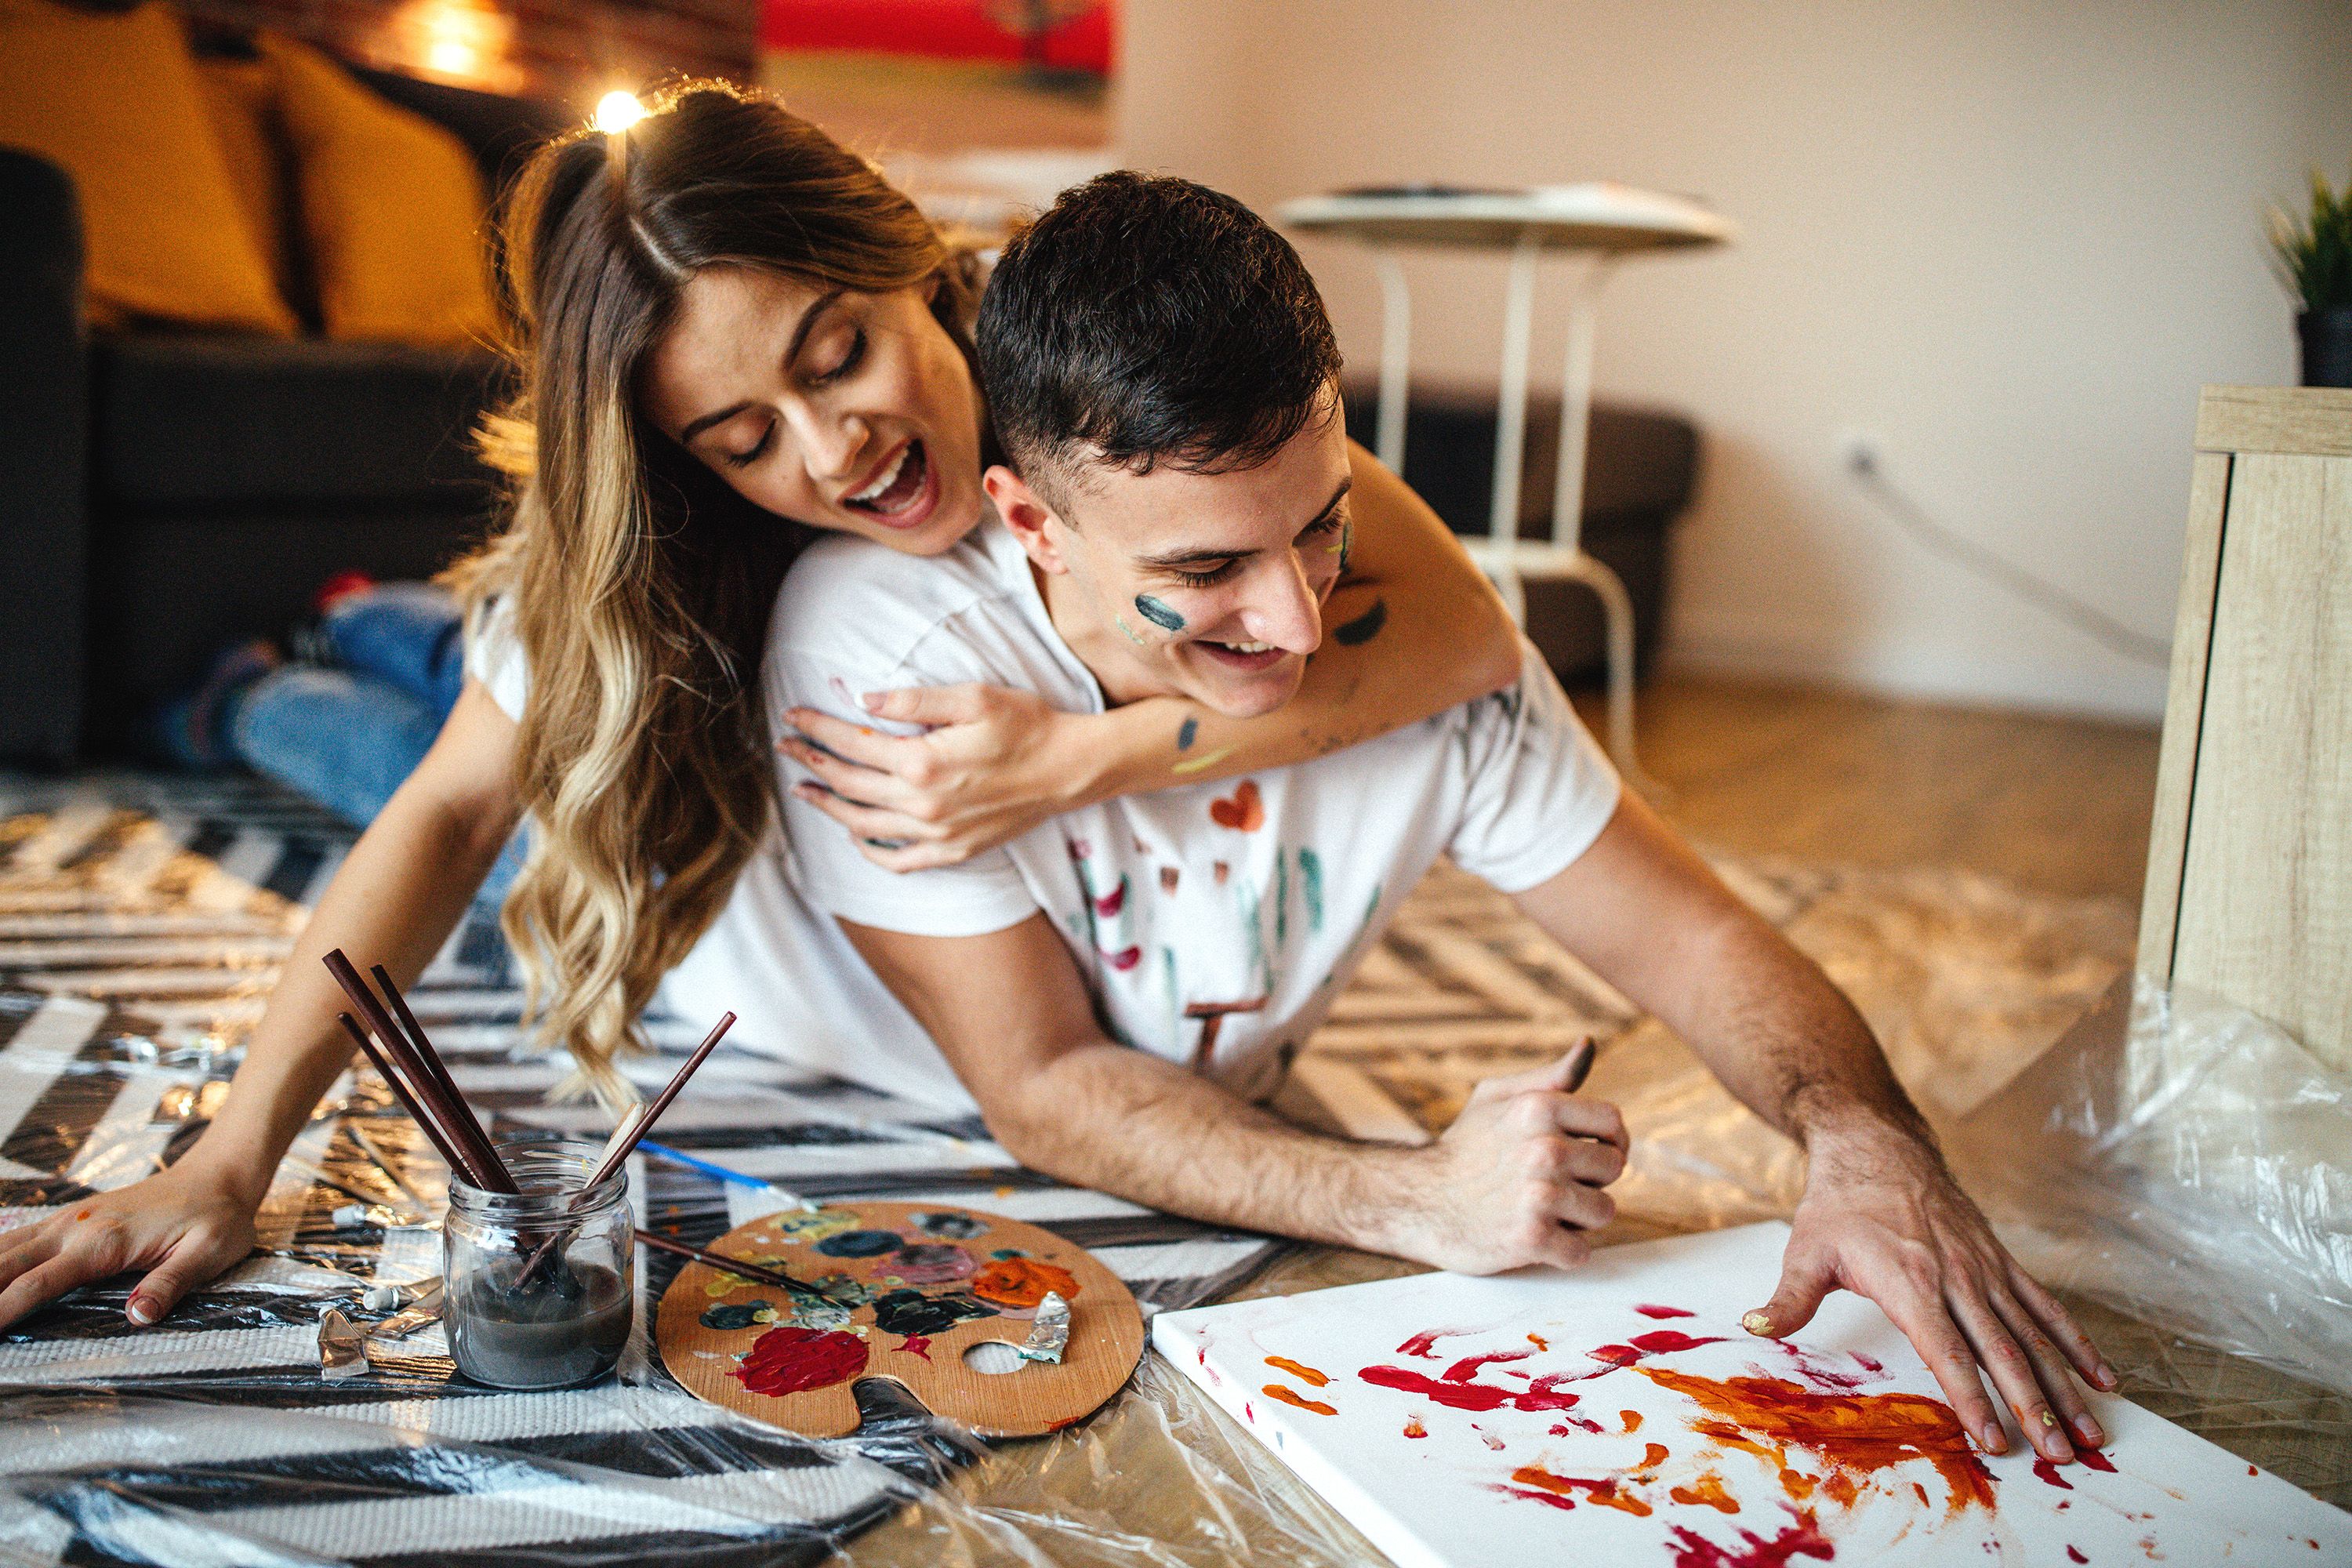 30 Indoor Date Ideas You and Your Partner Will Love